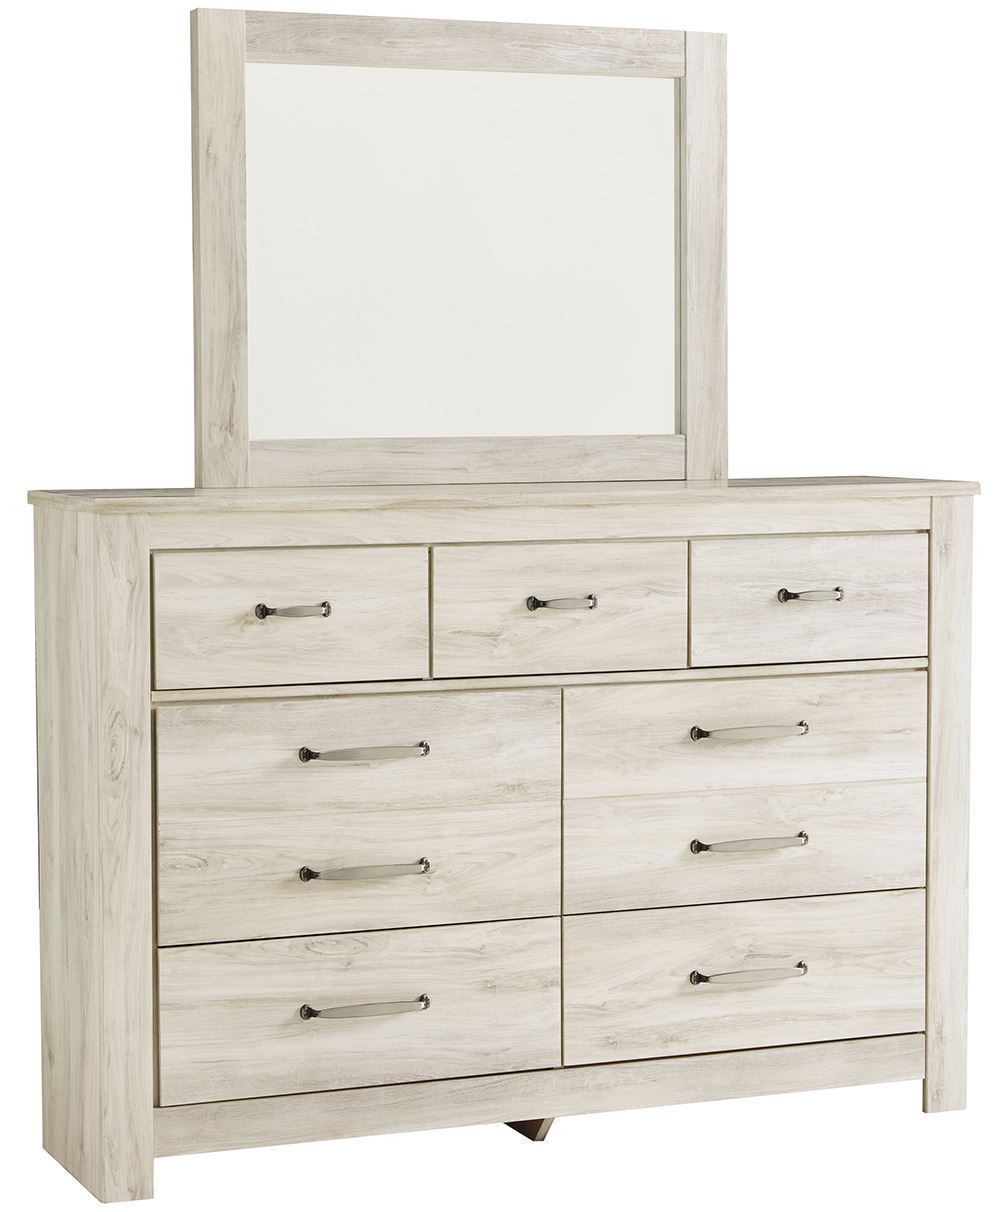 Picture of Bellaby Dresser and Mirror